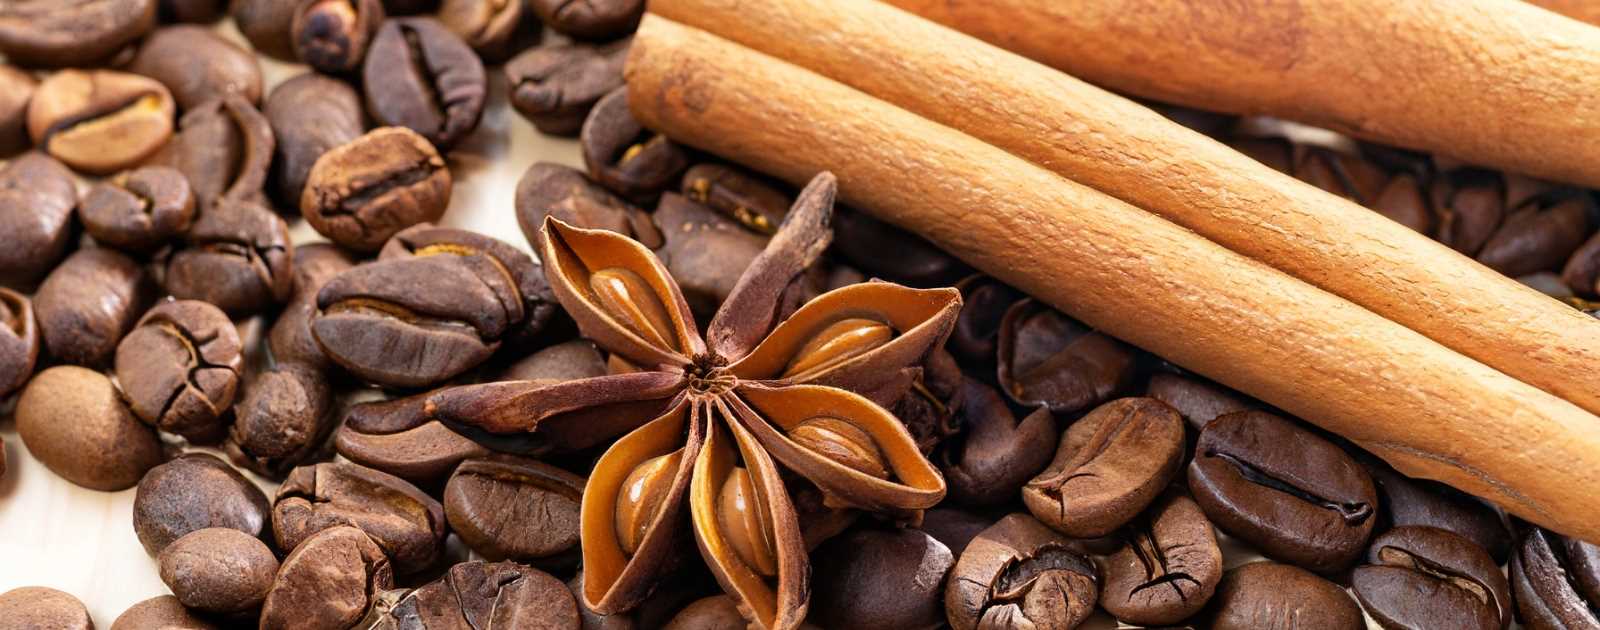 10 Benefits of Cloves Sexually